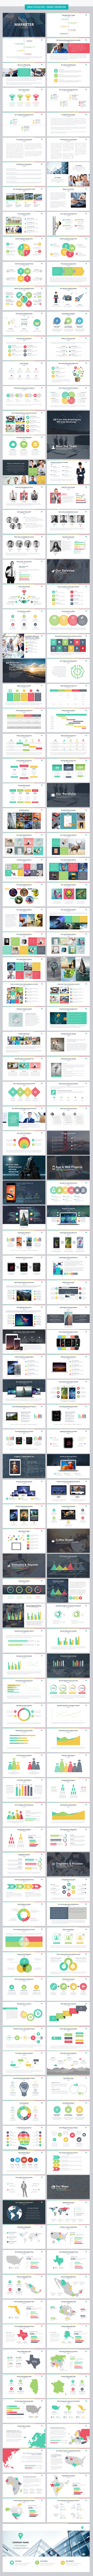 Marketer Pro Keynote presentation template powerpoint template free louis twelve Pitch Deck Pro investor ANNUAL infographic Sales Report